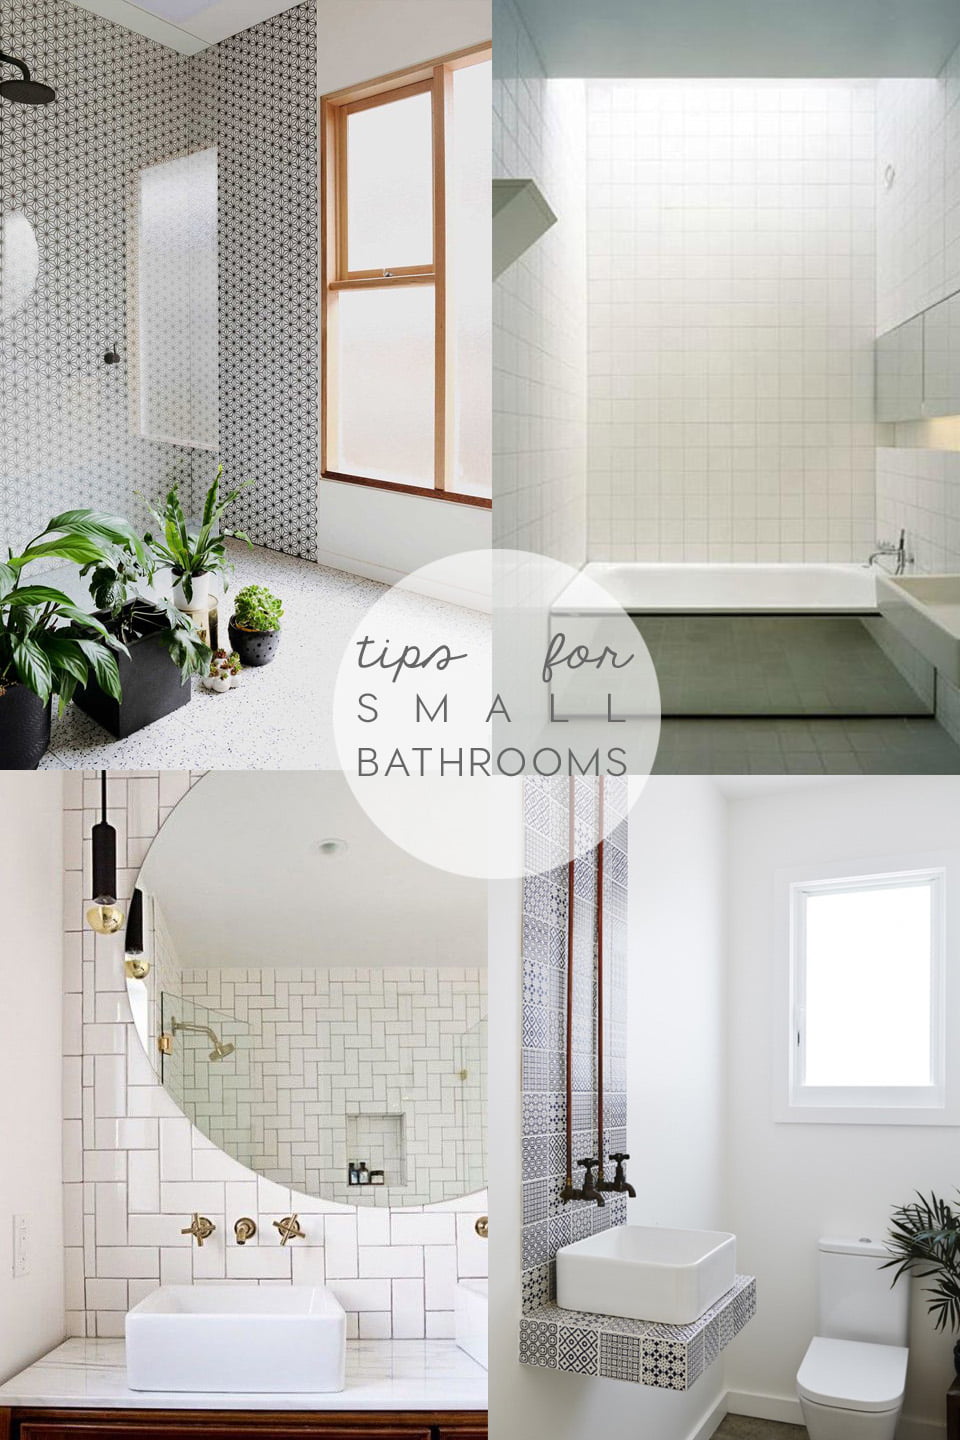 How To Make A Small Bathroom Look Bigger In 7 Tips